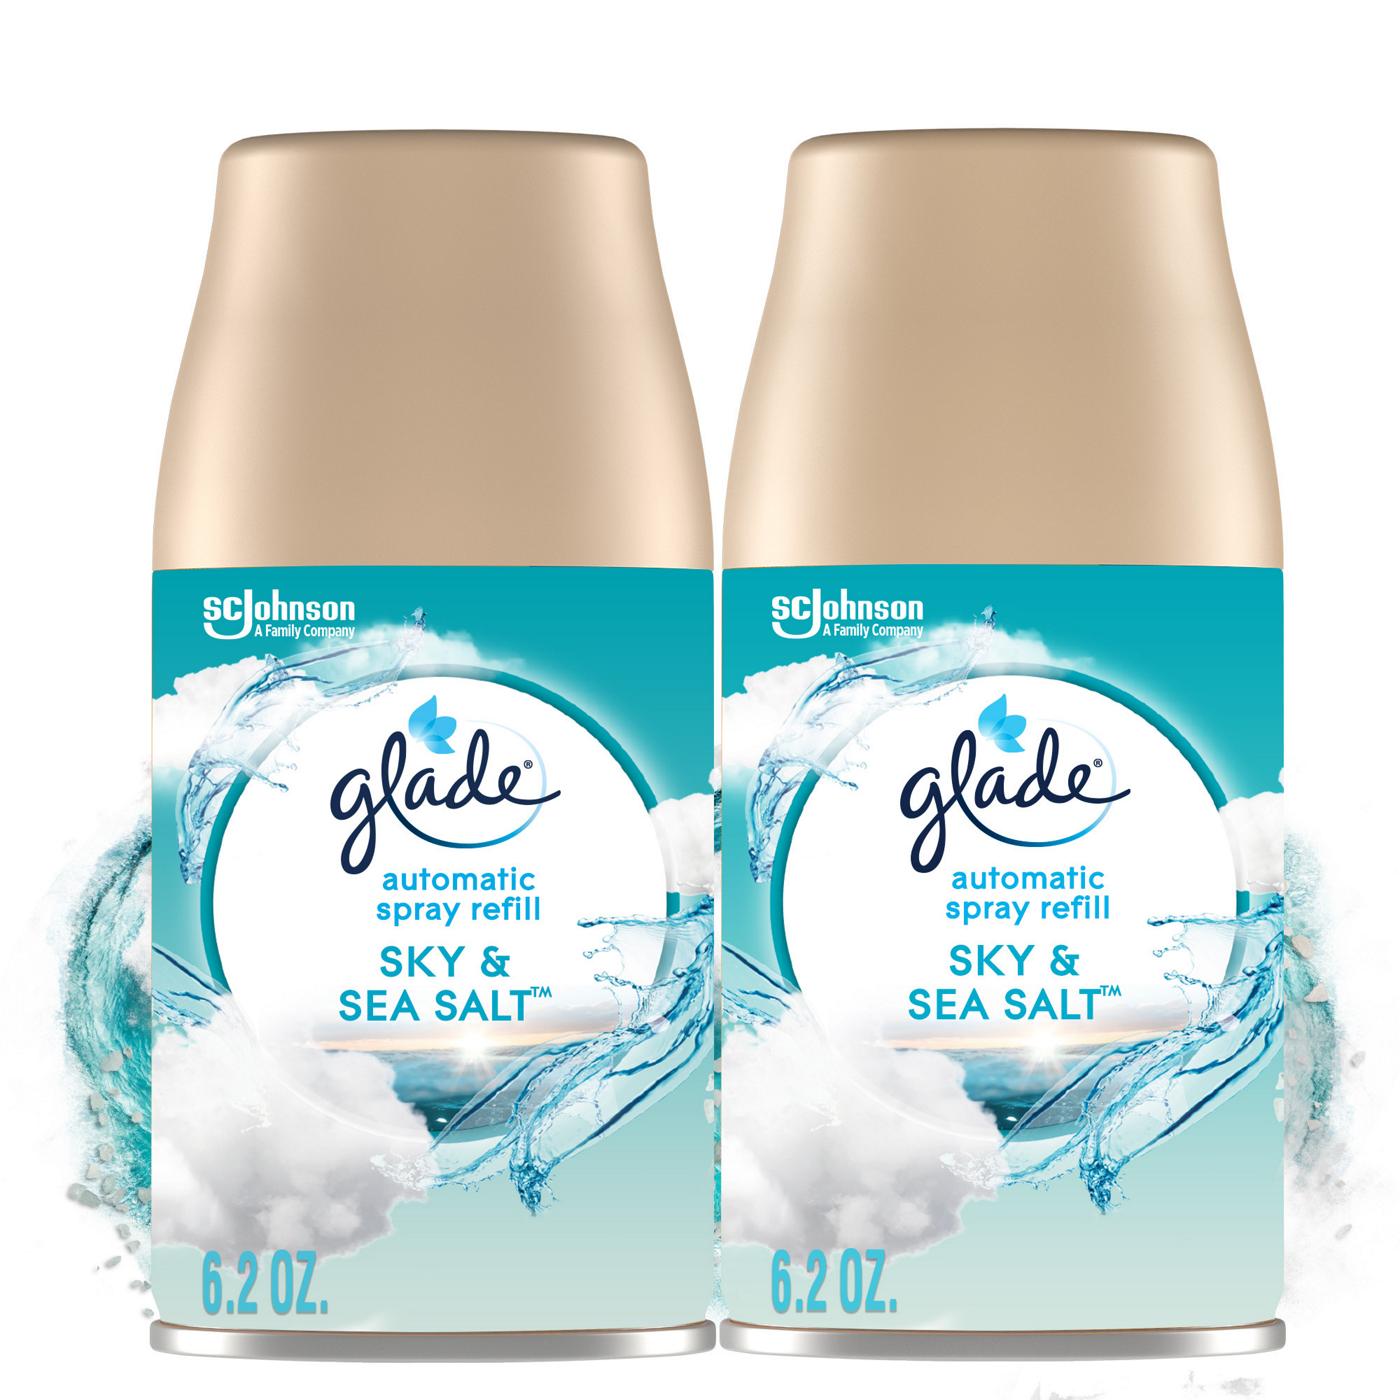 Glade Automatic Spray Refill, Value Pack - Sky & Sea Salt; image 1 of 3